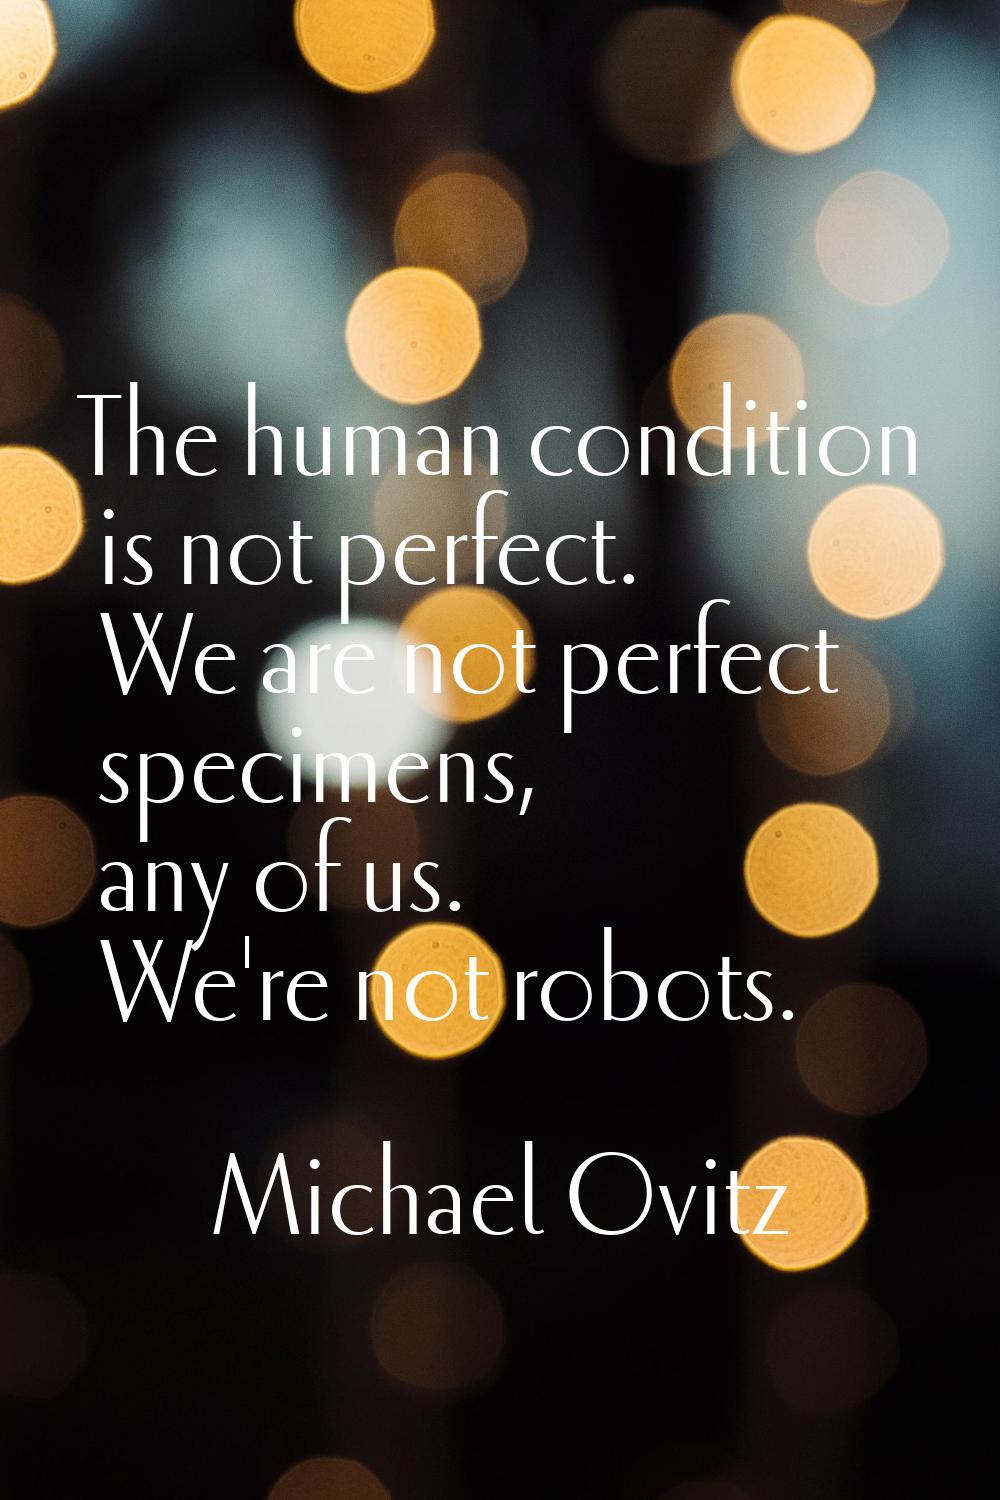 The human condition is not perfect. We are not perfect specimens, any of us. We're not robots.